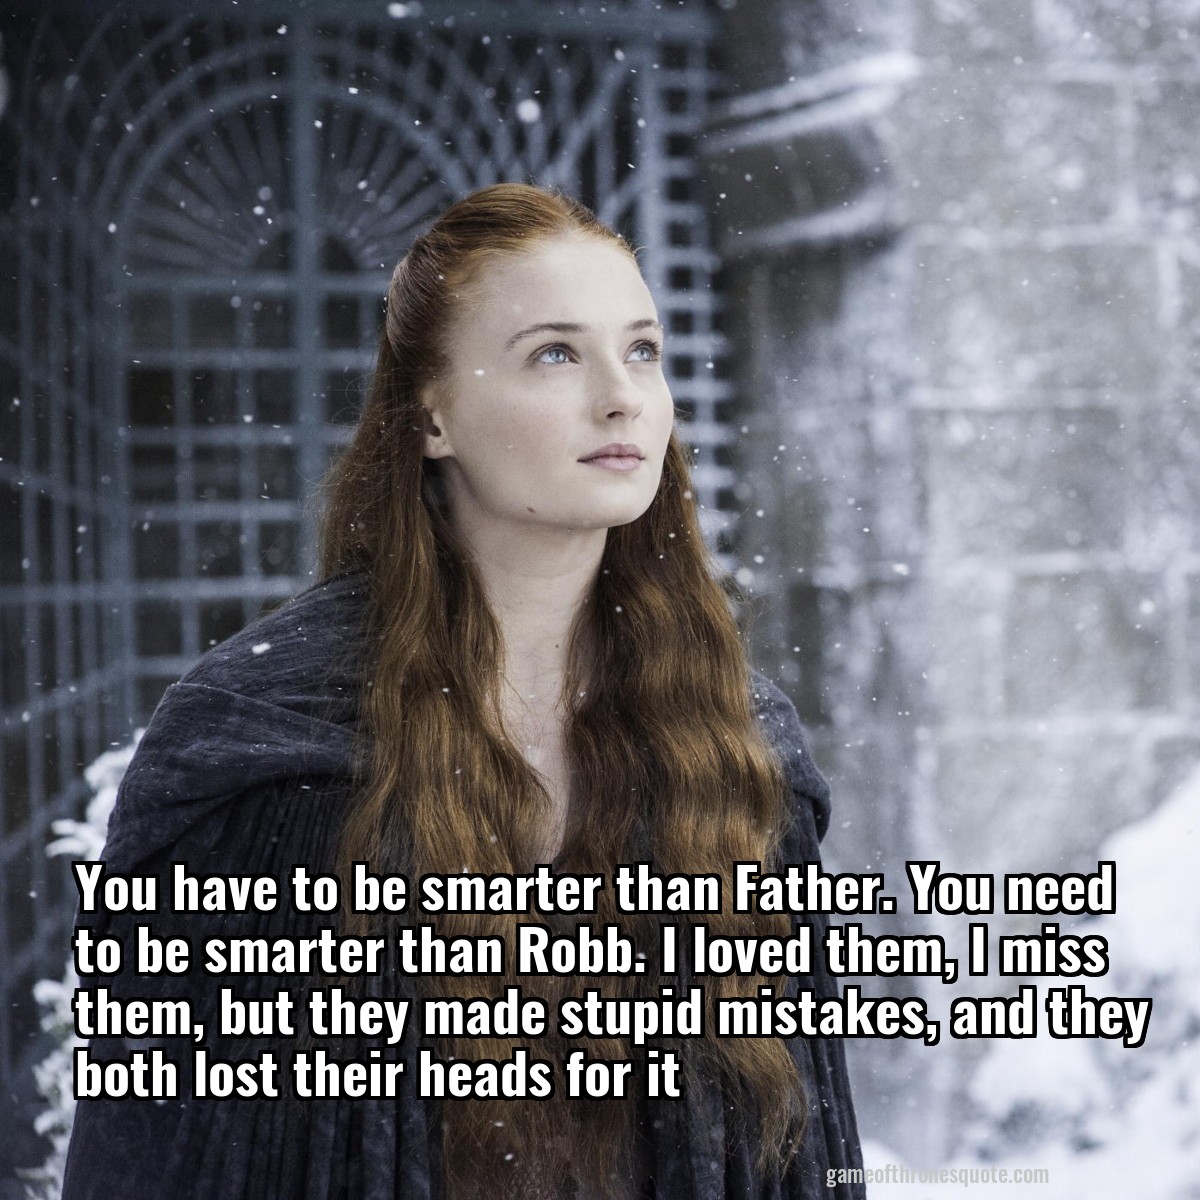 You have to be smarter than Father. You need to be smarter than Robb. I loved them, I miss them, but they made stupid mistakes, and they both lost their heads for it